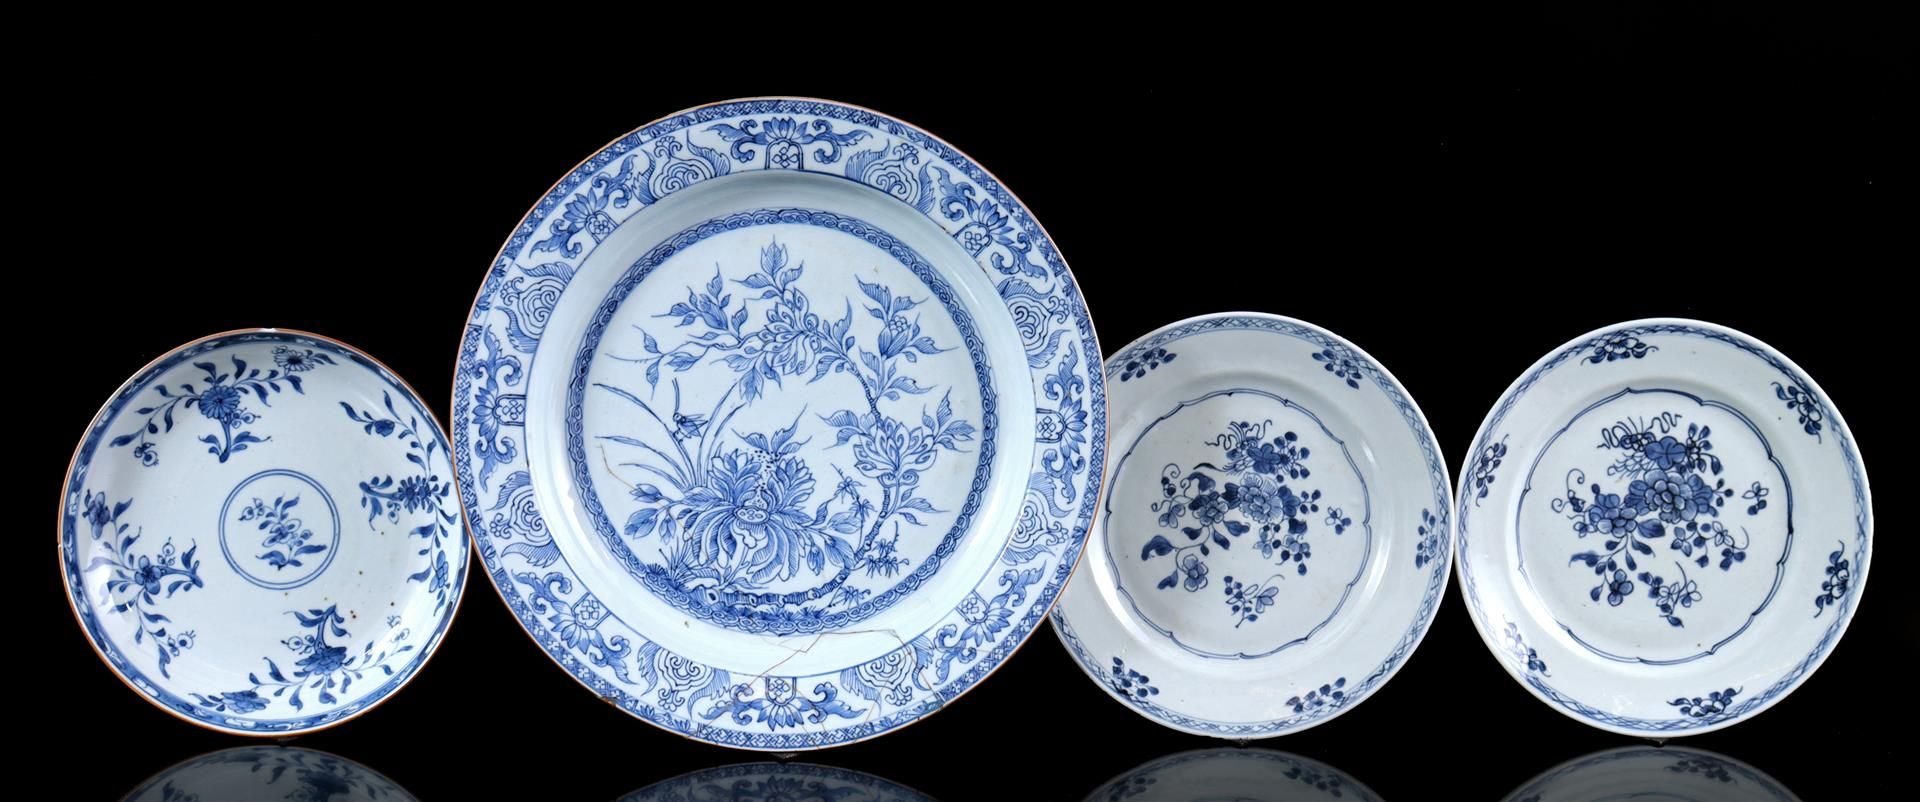 2 porcelain dishes with floral decor, China, ca. 1800